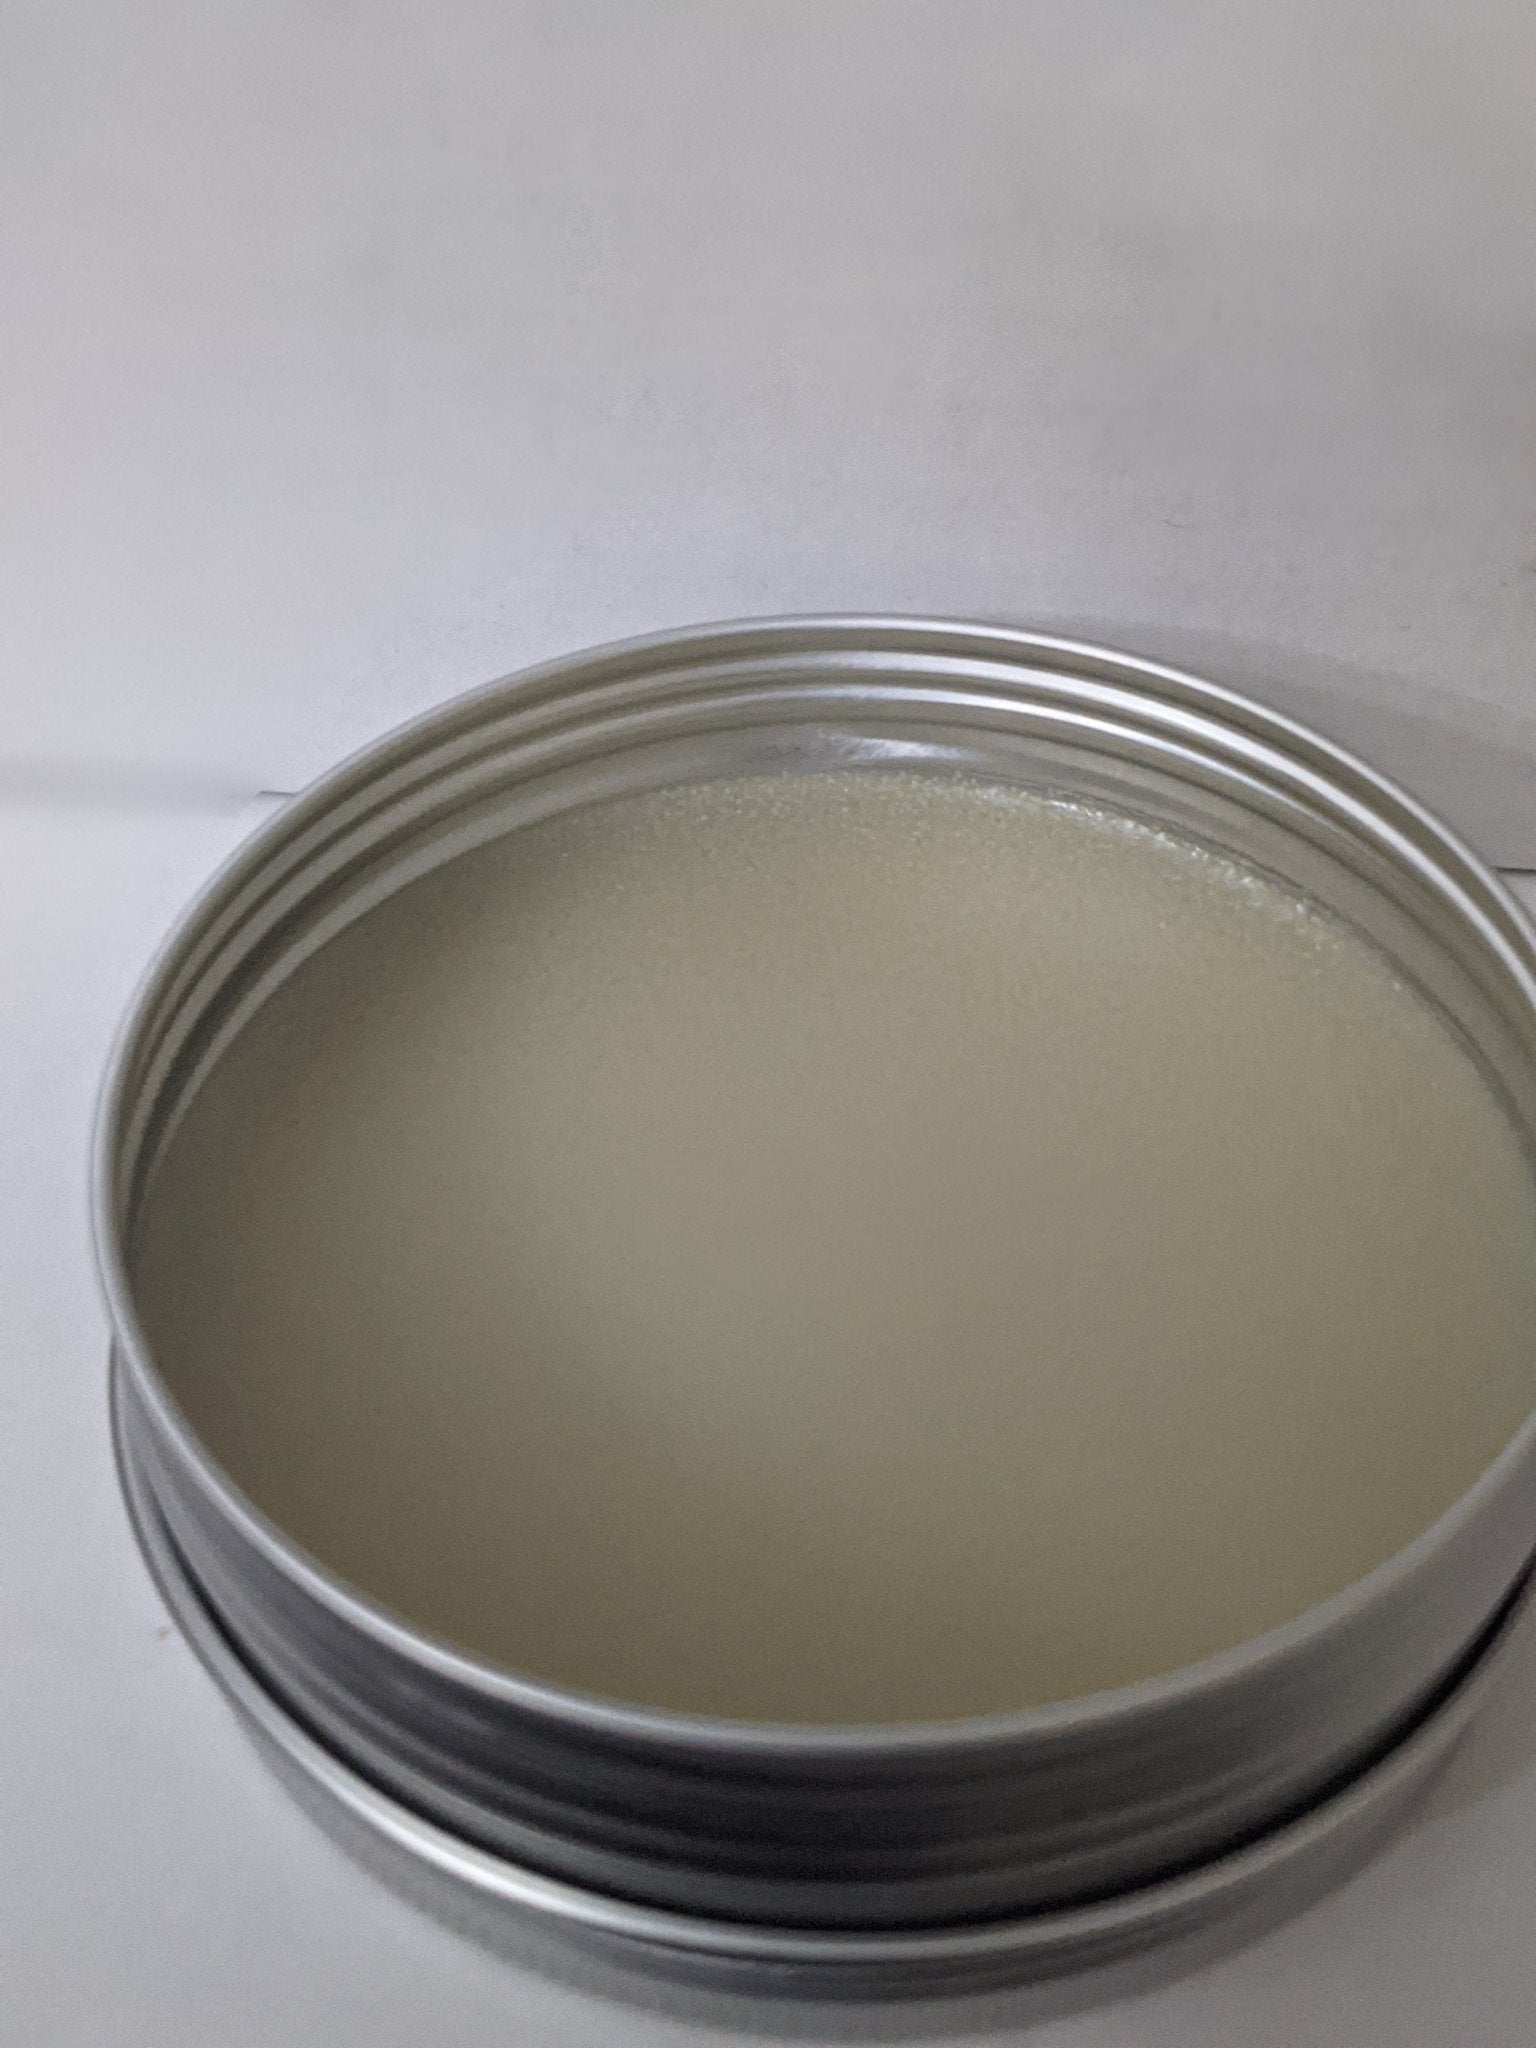 PUPPY NOSE AND PAW BALM - LAVENDER AND WATER